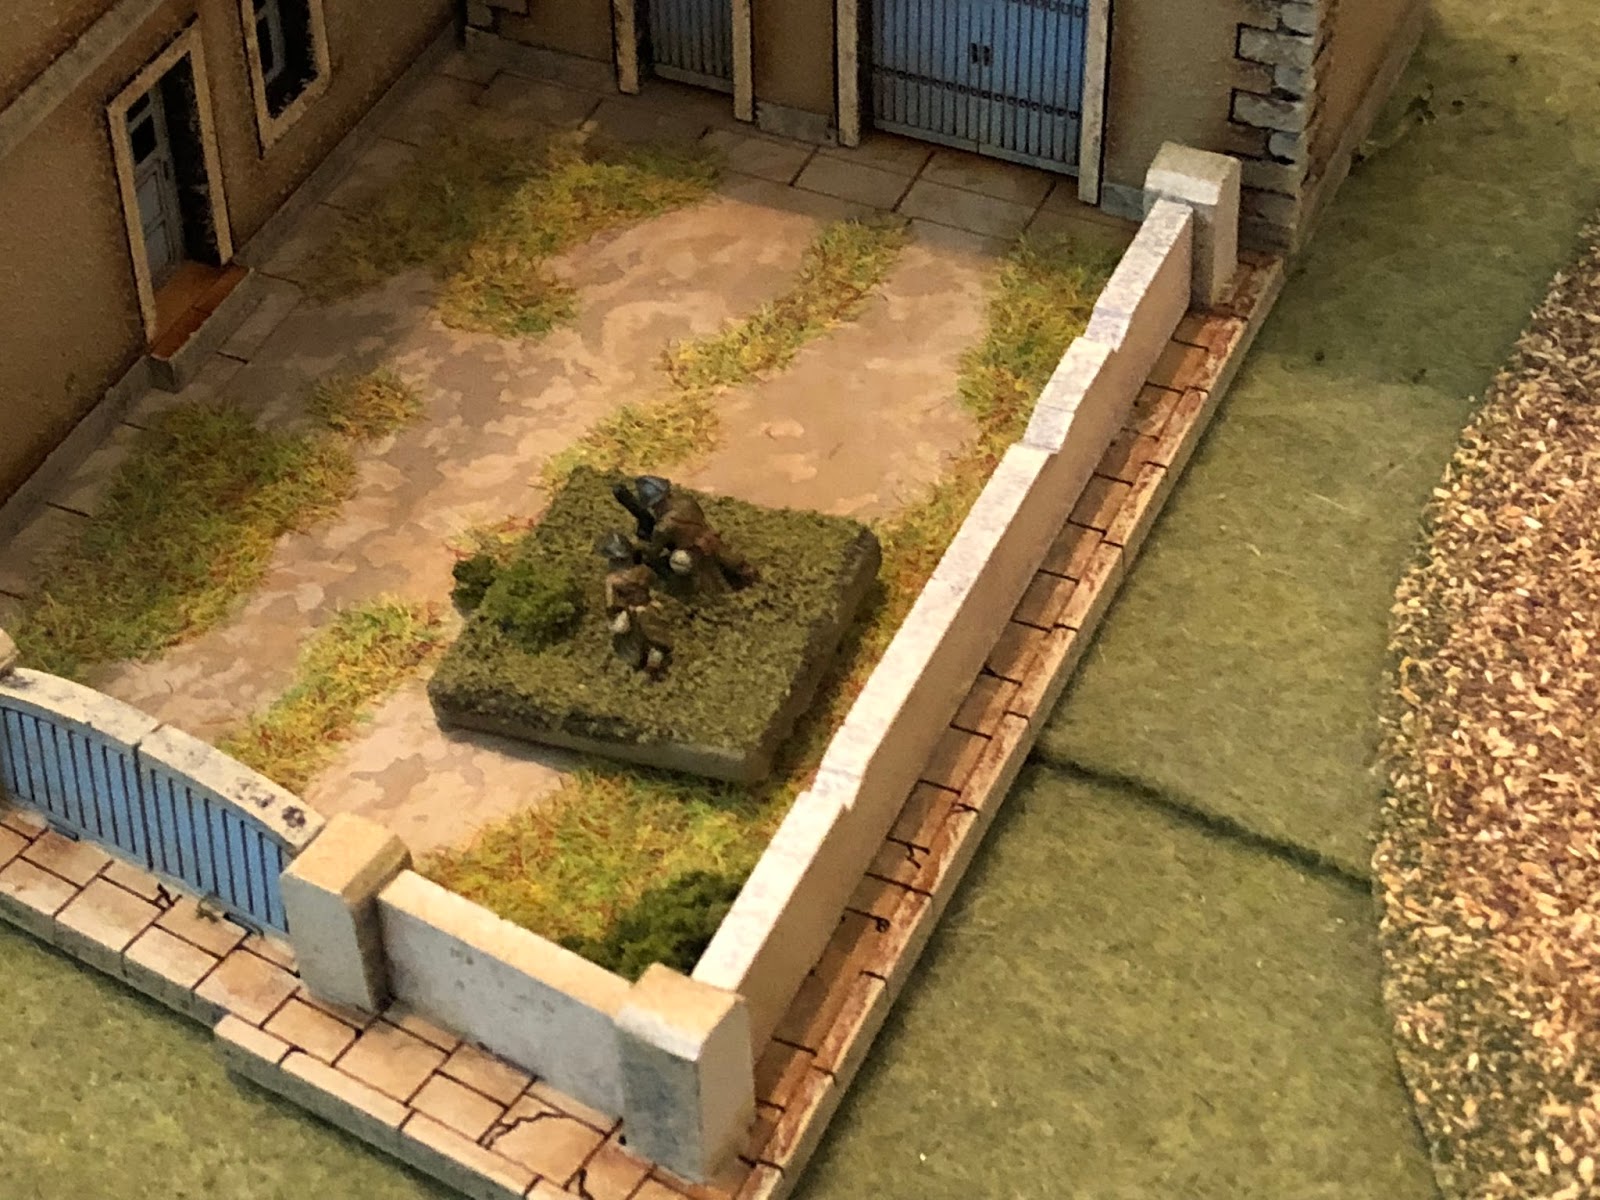  Below in the courtyard, the French 81mm mortar fires a spotting round at the German ATGs, which is off target... 